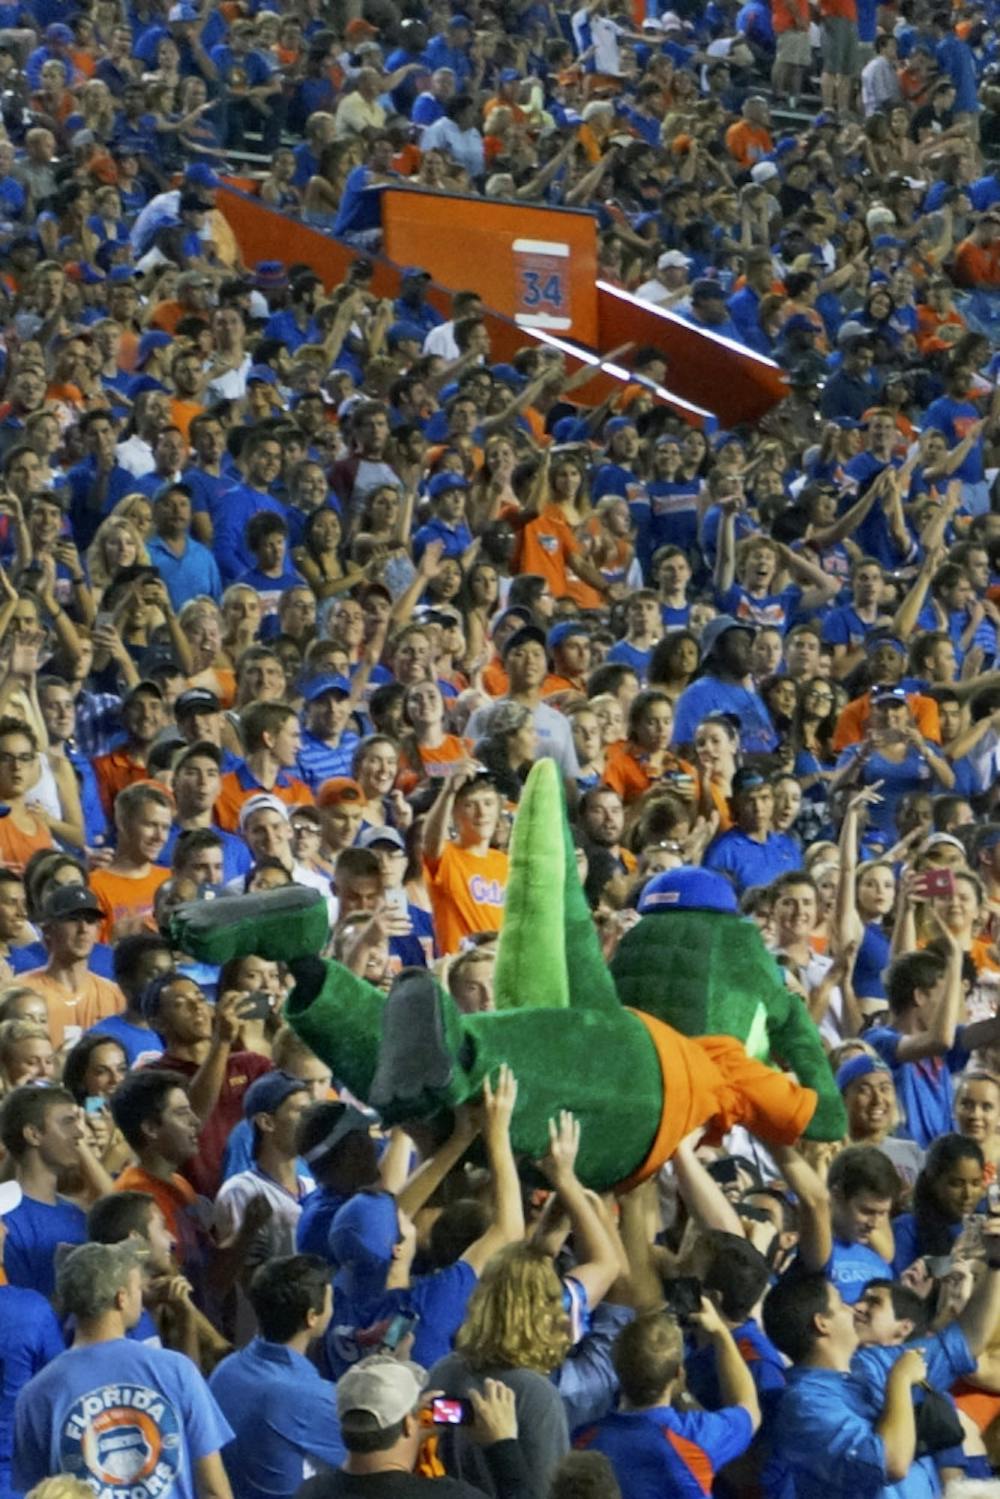 <p>Albert, one of UF's two mascots, surfs the crowd at the football game Sept. 5, 2015. Students and beach balls also traversed across the top of the fray.</p>